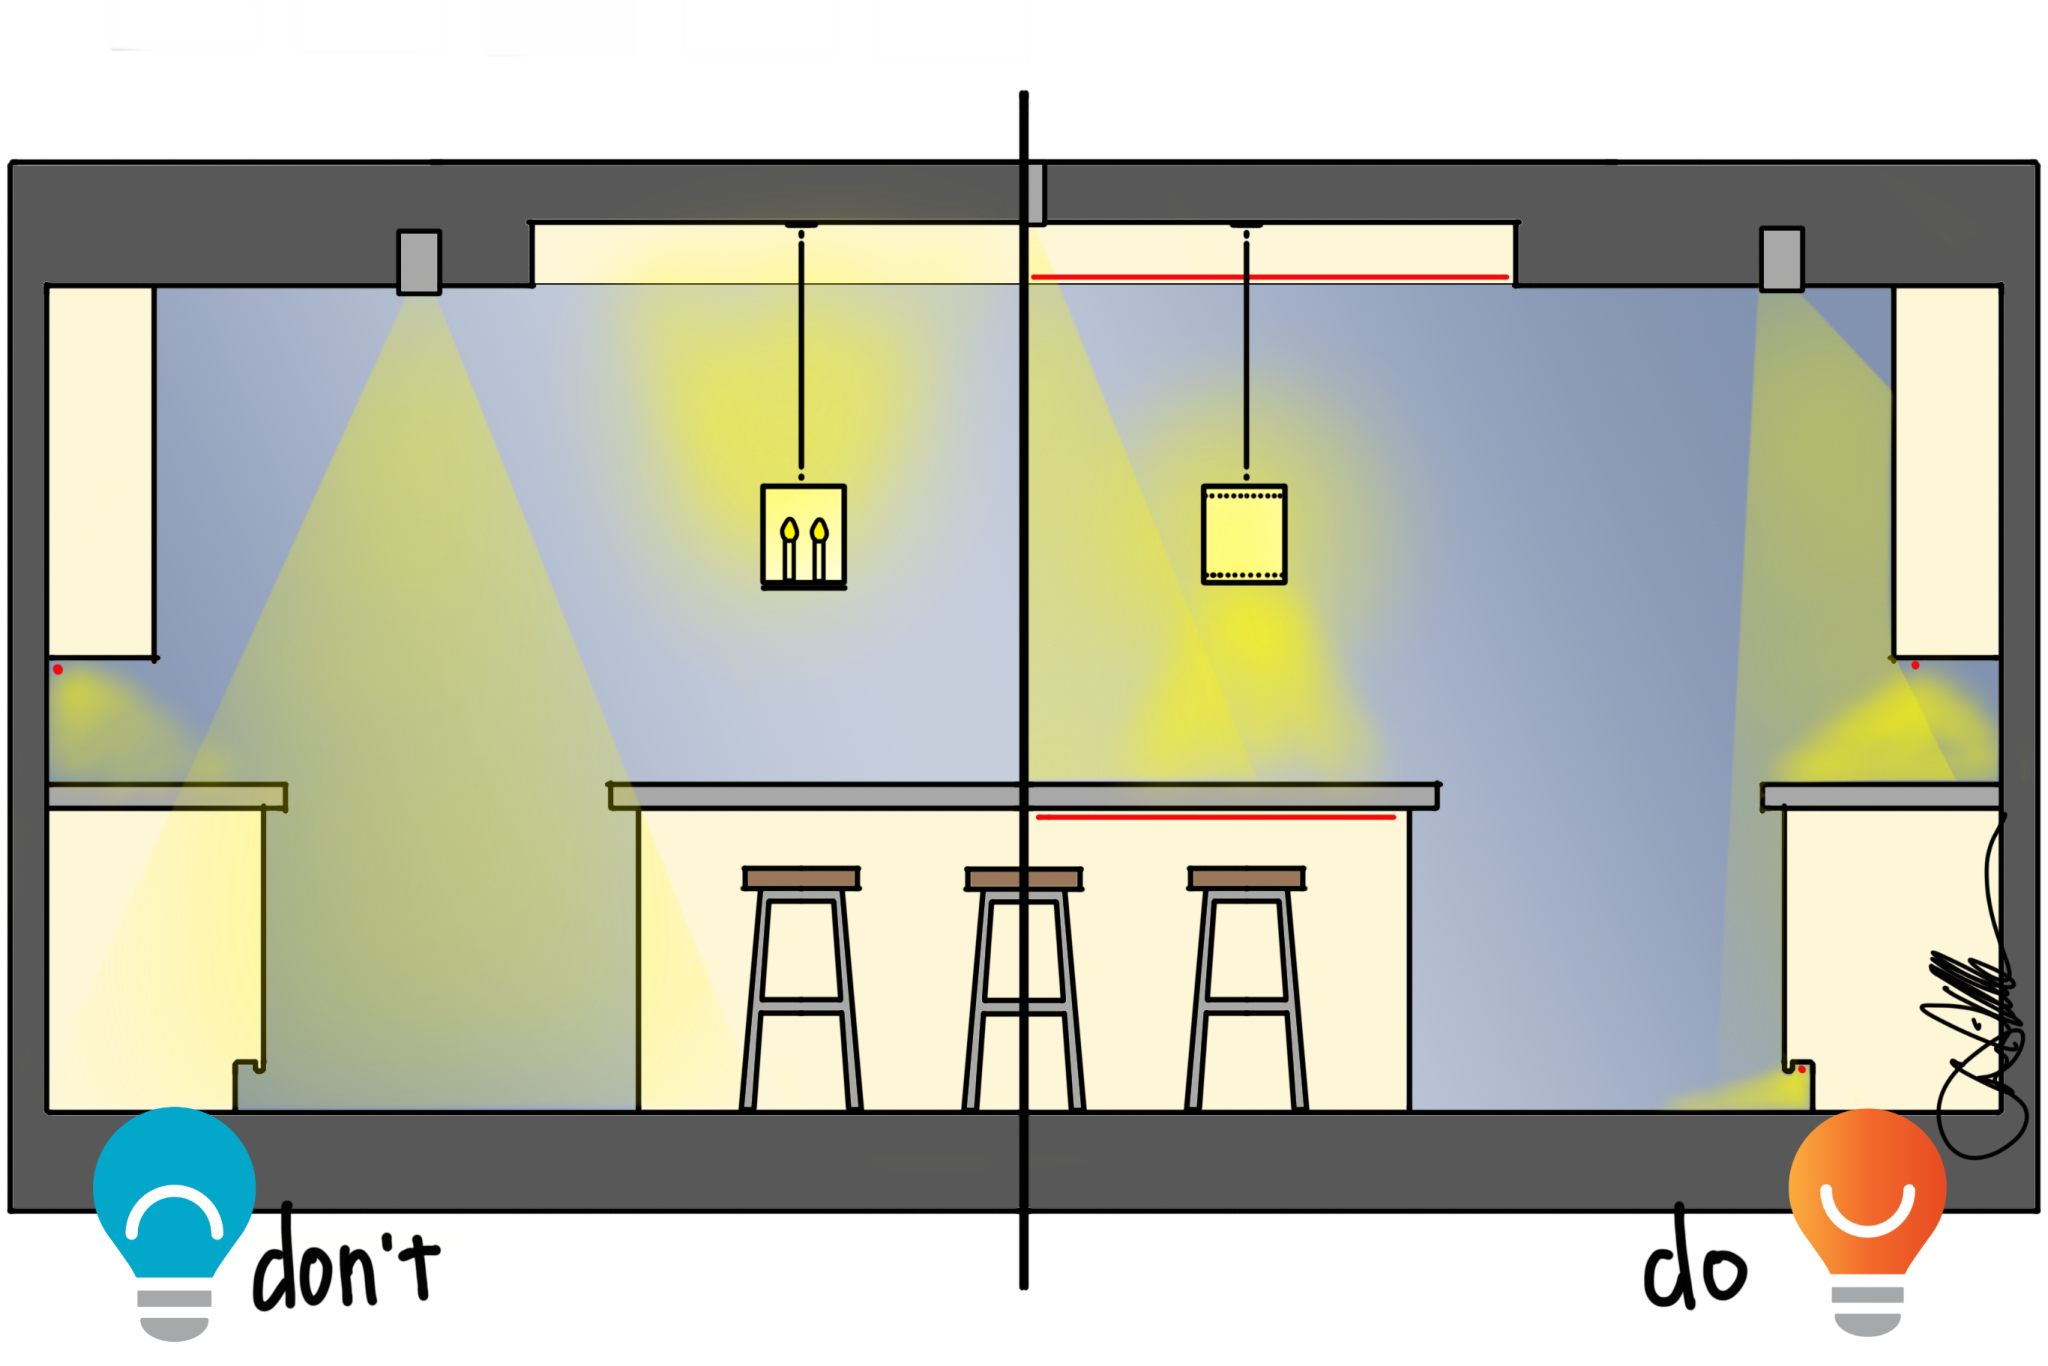 A drawing of a kitchen with the left side an example of bad lighting, and the right side an example of good lighting